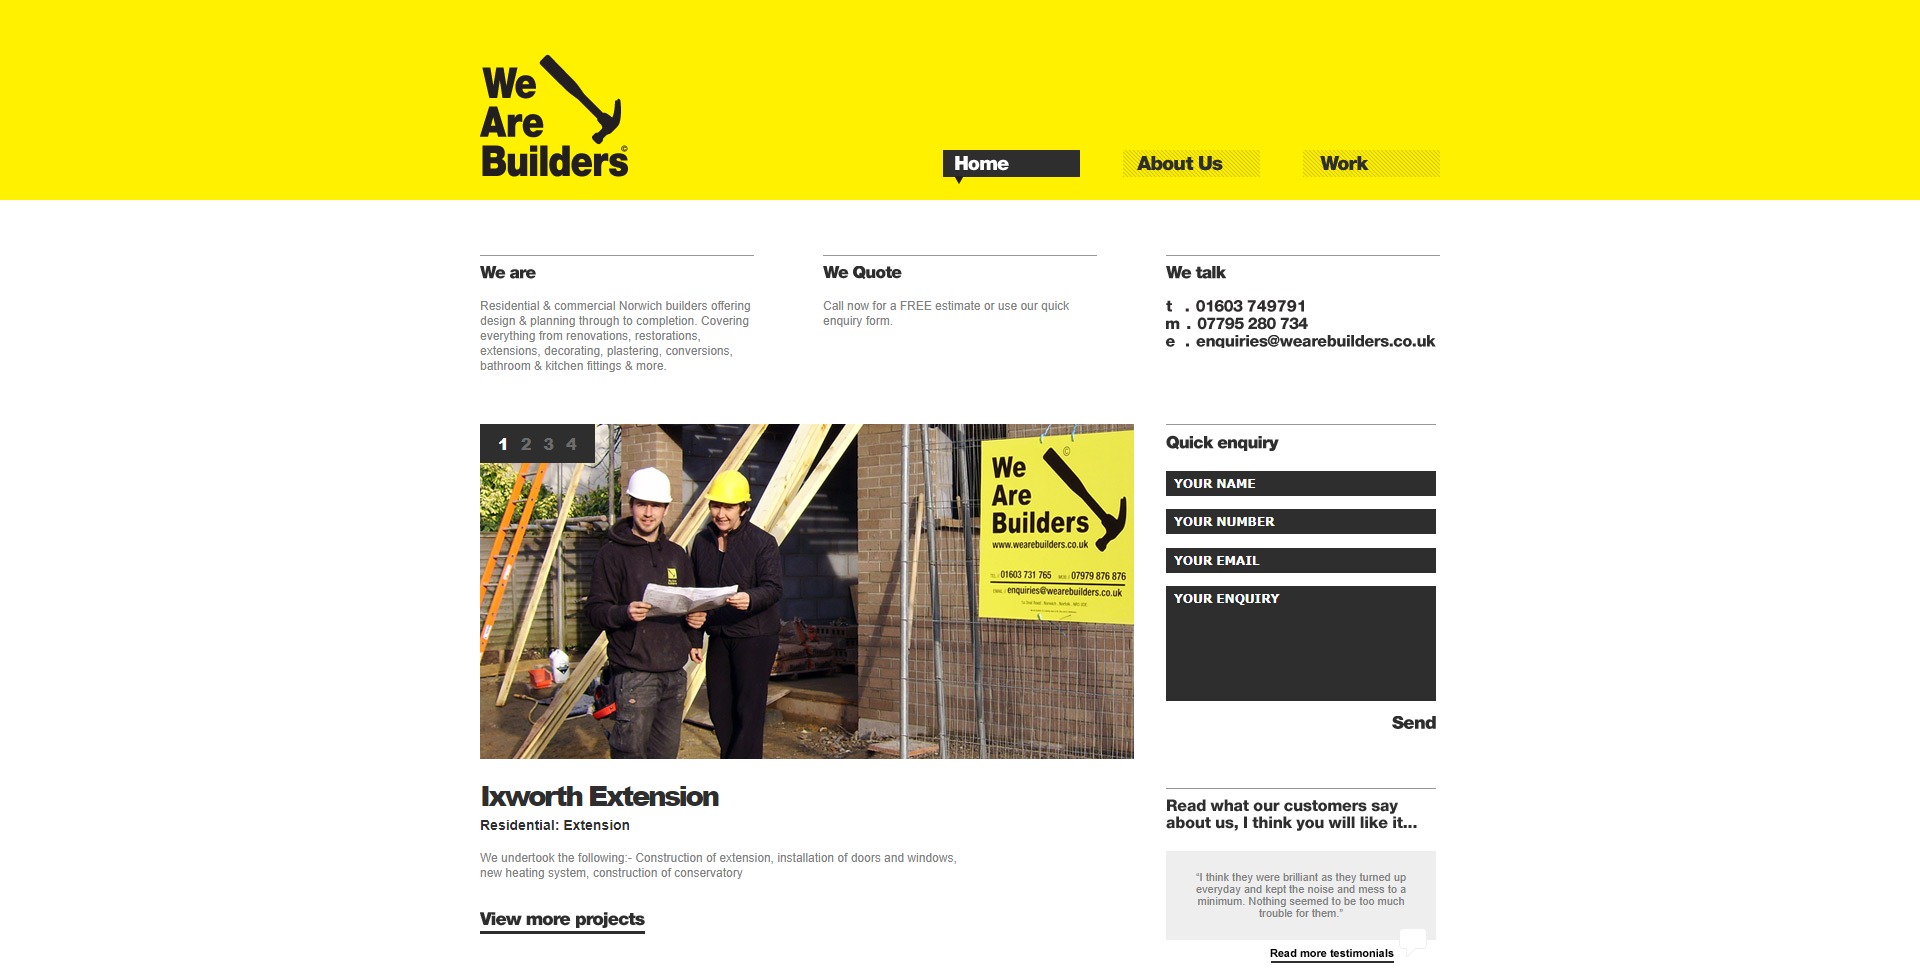 We Are Builders